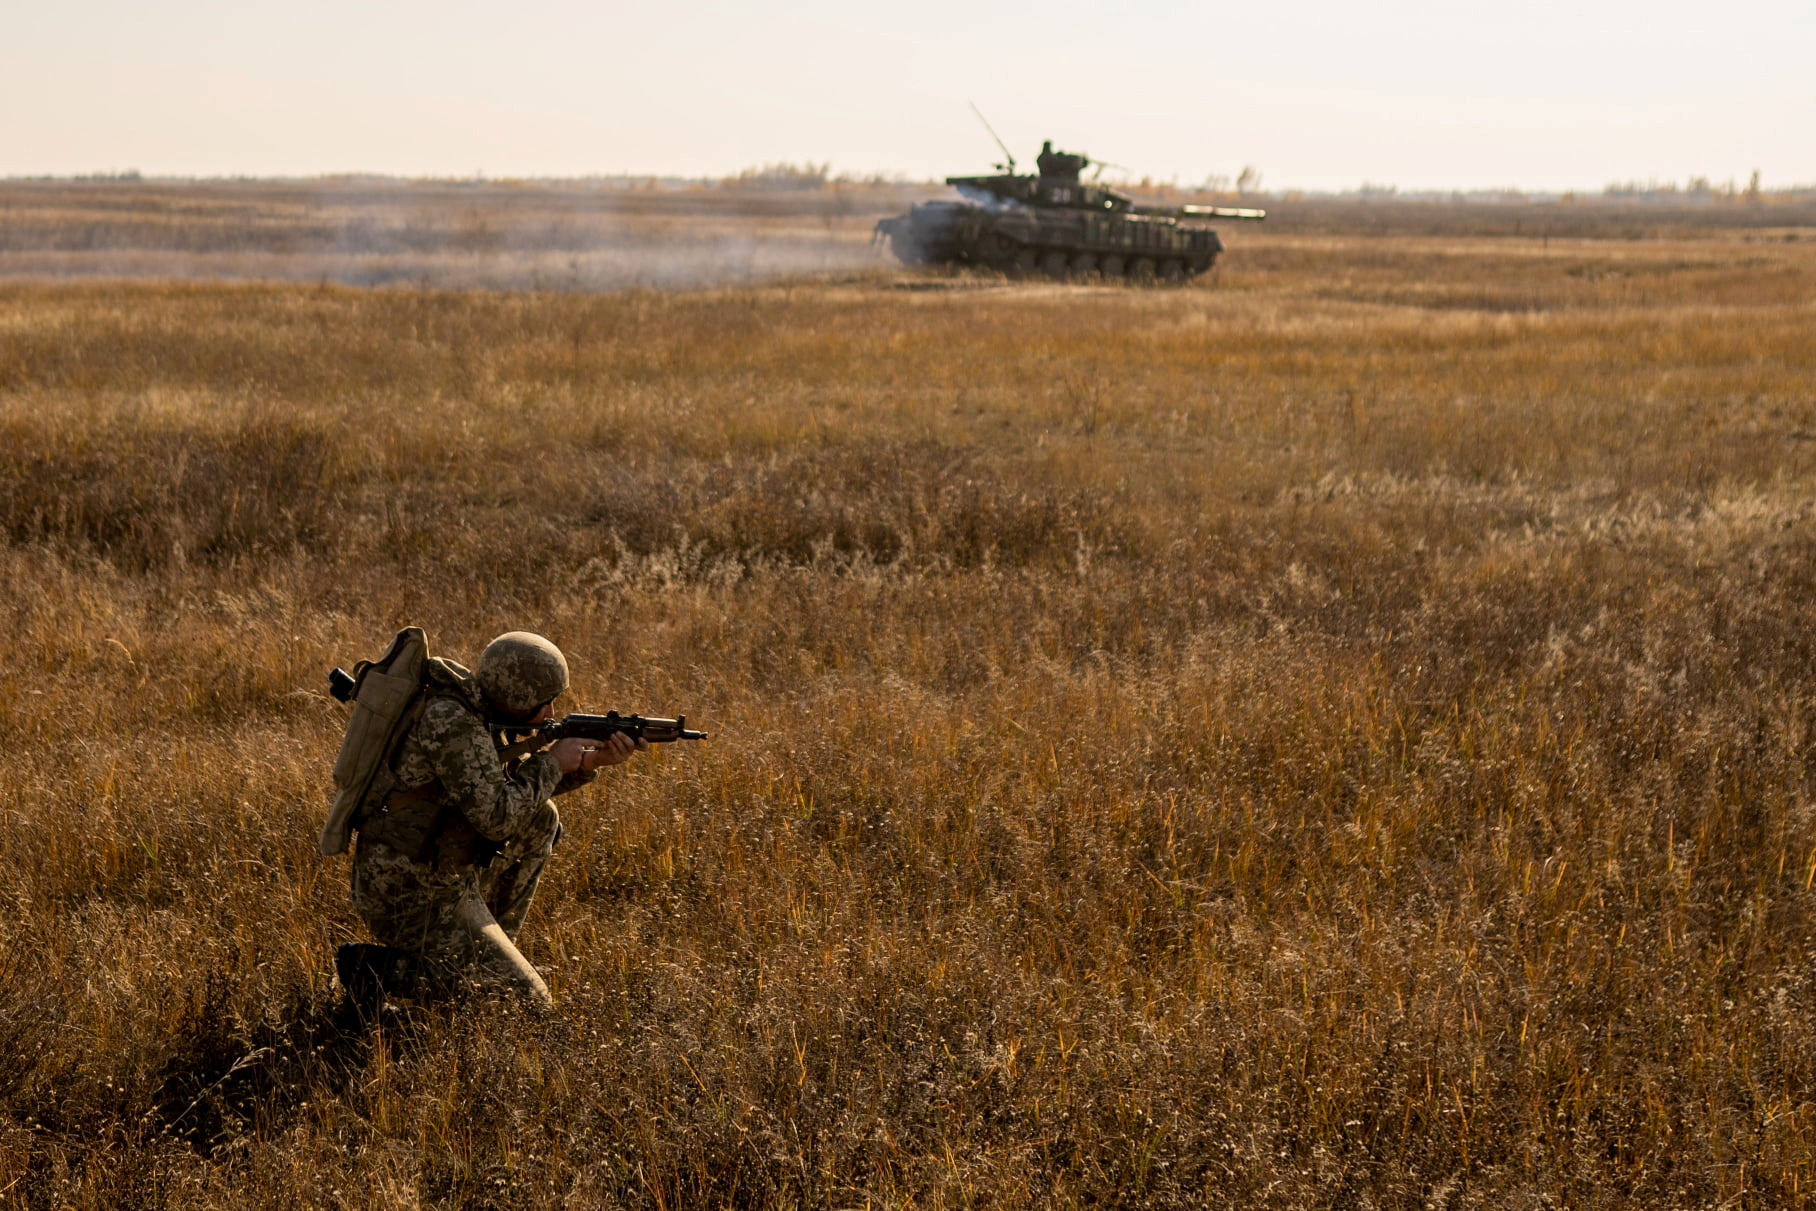 A serviceman of the Ukrainian Armed Forces takes part in military drills at a training ground near the border with Russian-annexed Crimea in Kherson region, Ukraine, in this handout picture released by the General Staff of the Armed Forces of Ukraine press service November 17, 2021. Press Service of General Staff of the Armed Forces of Ukraine/Handout via REUTERS 